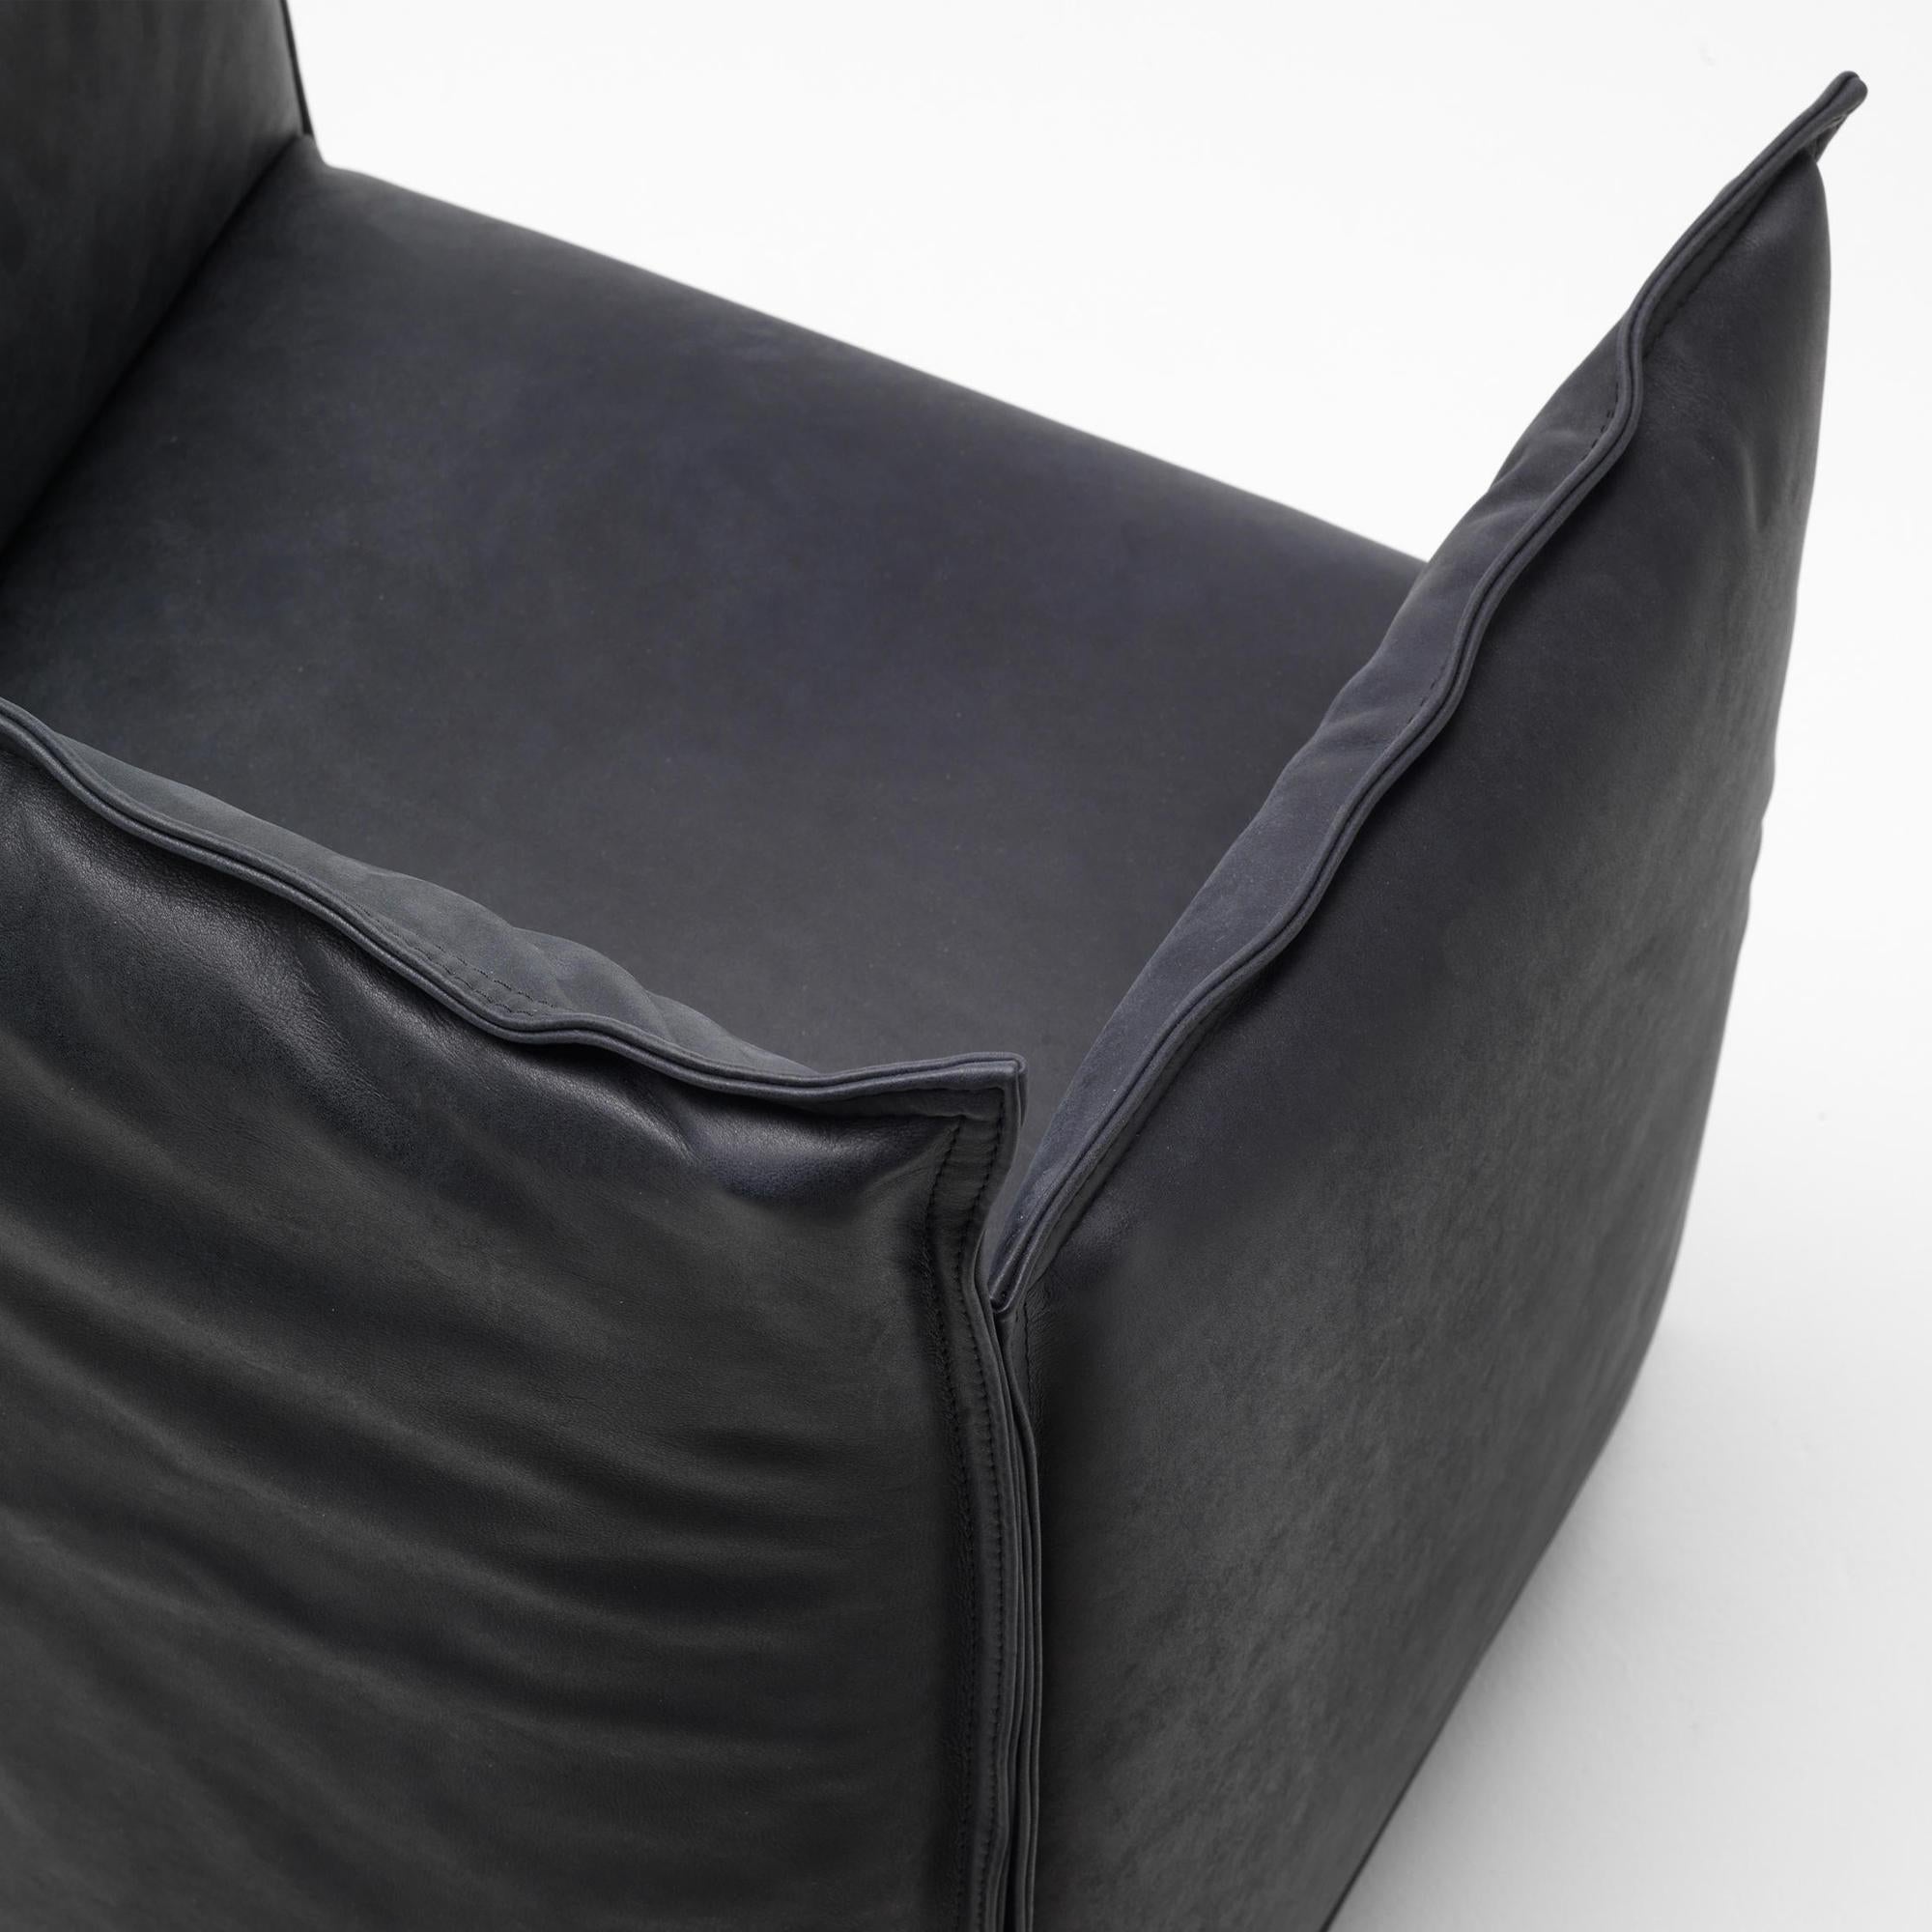 21st Century Modern Small Armchair Upholstered In Leather  In New Condition For Sale In Milan, IT